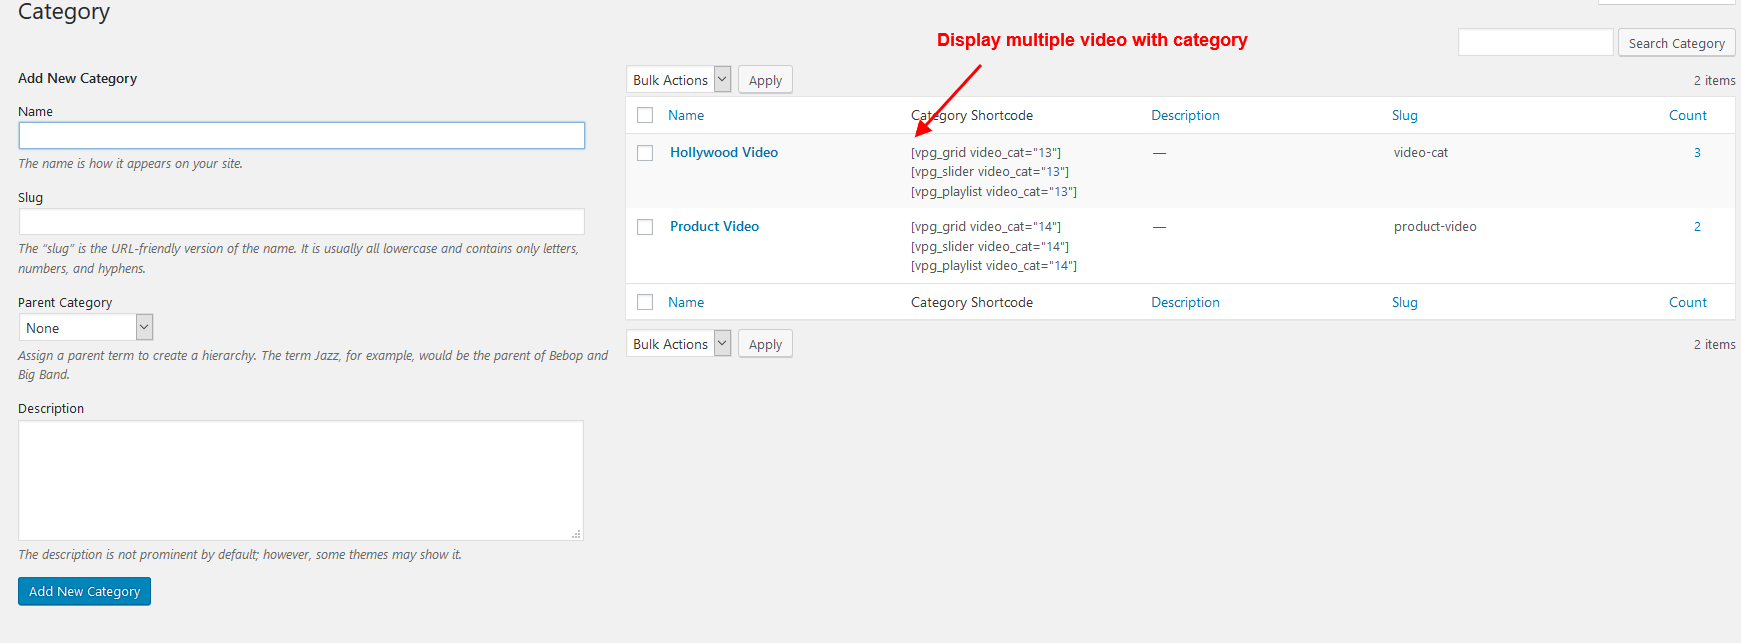 Use multiple video using category.